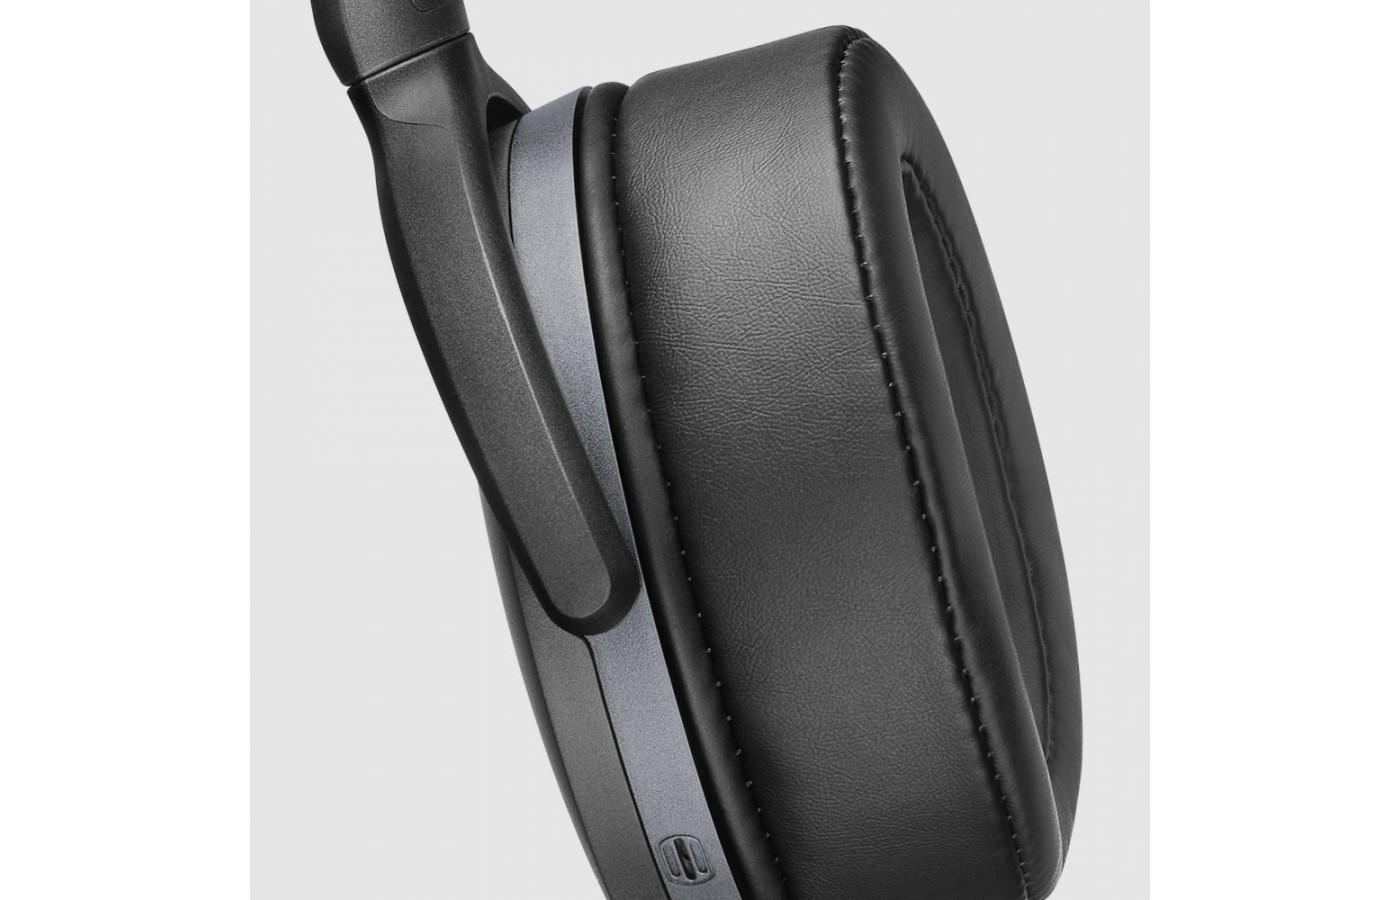 The headphones have deep ergonomically designed ear pads and over-ear design.